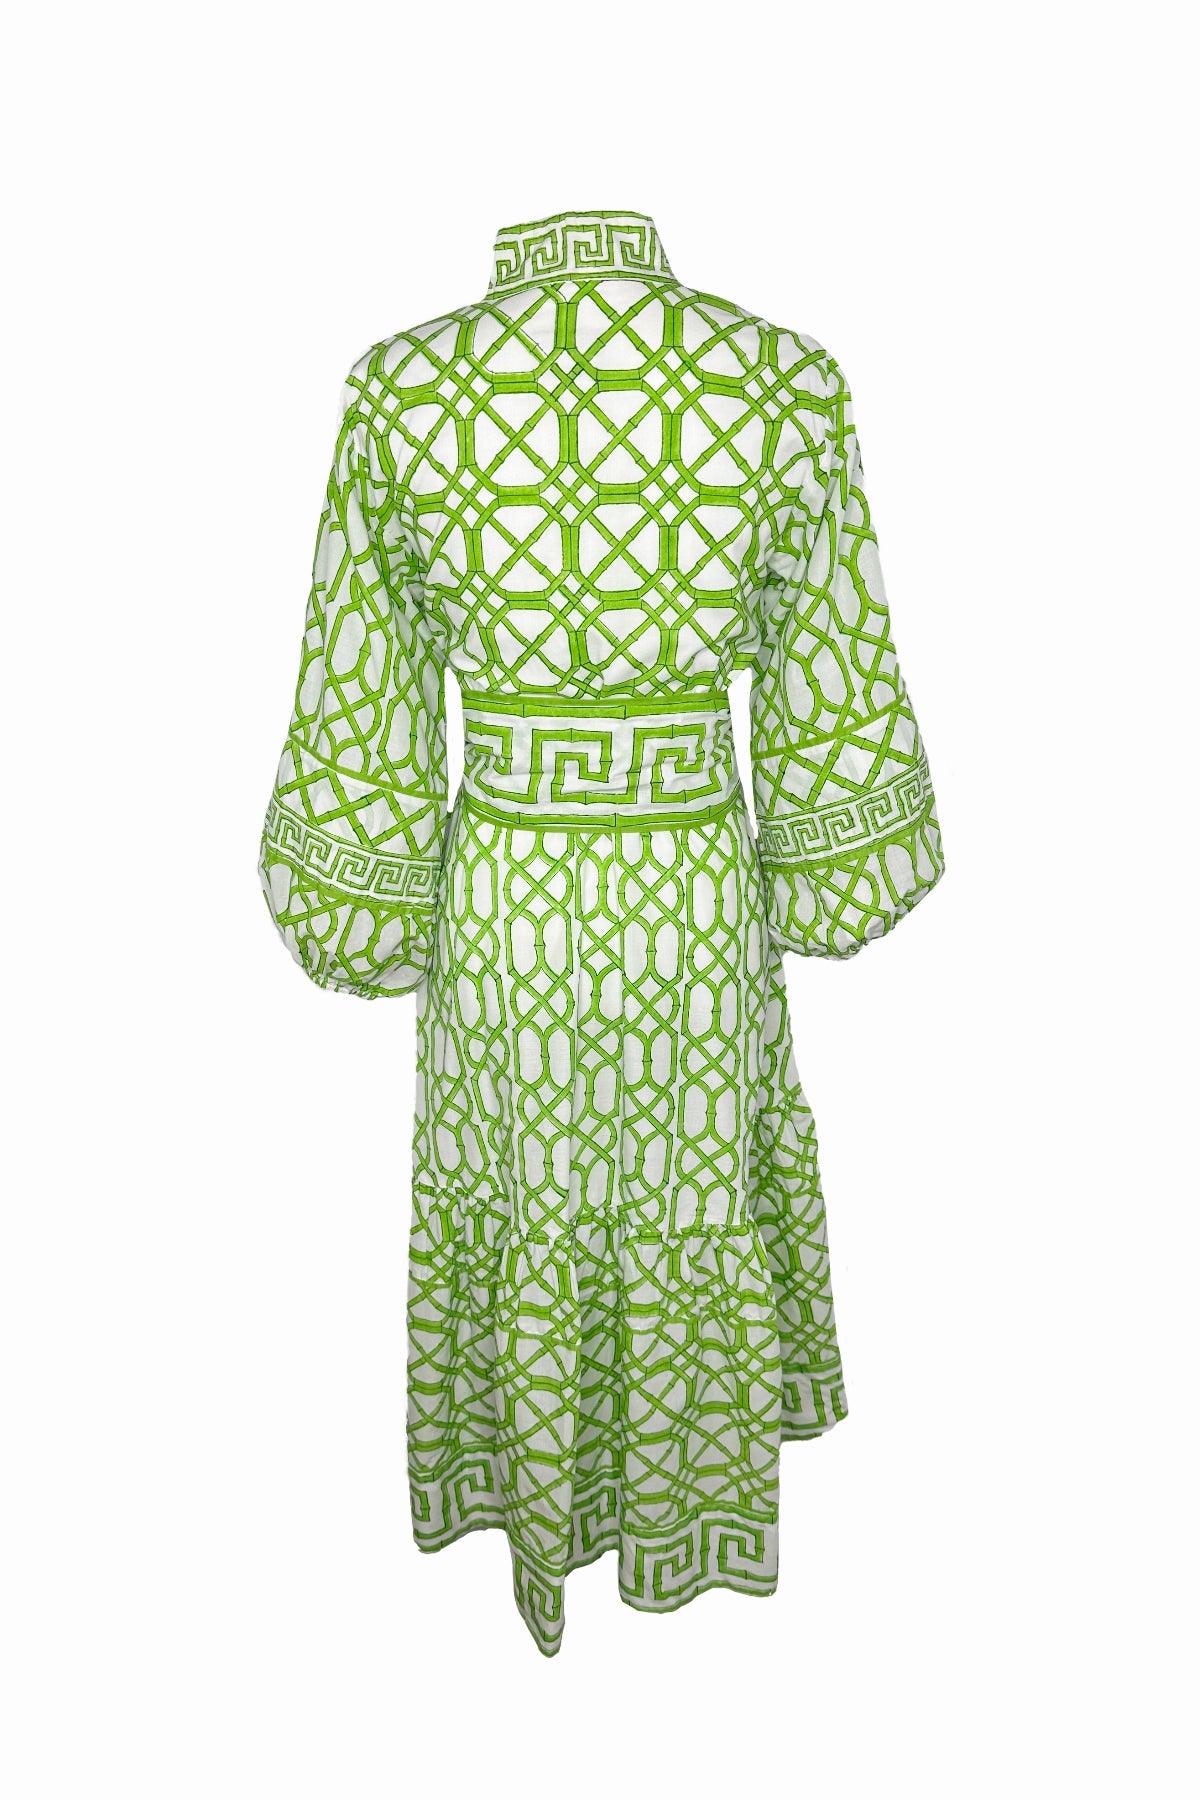 Flounce Dress in Key Lime Bamboo